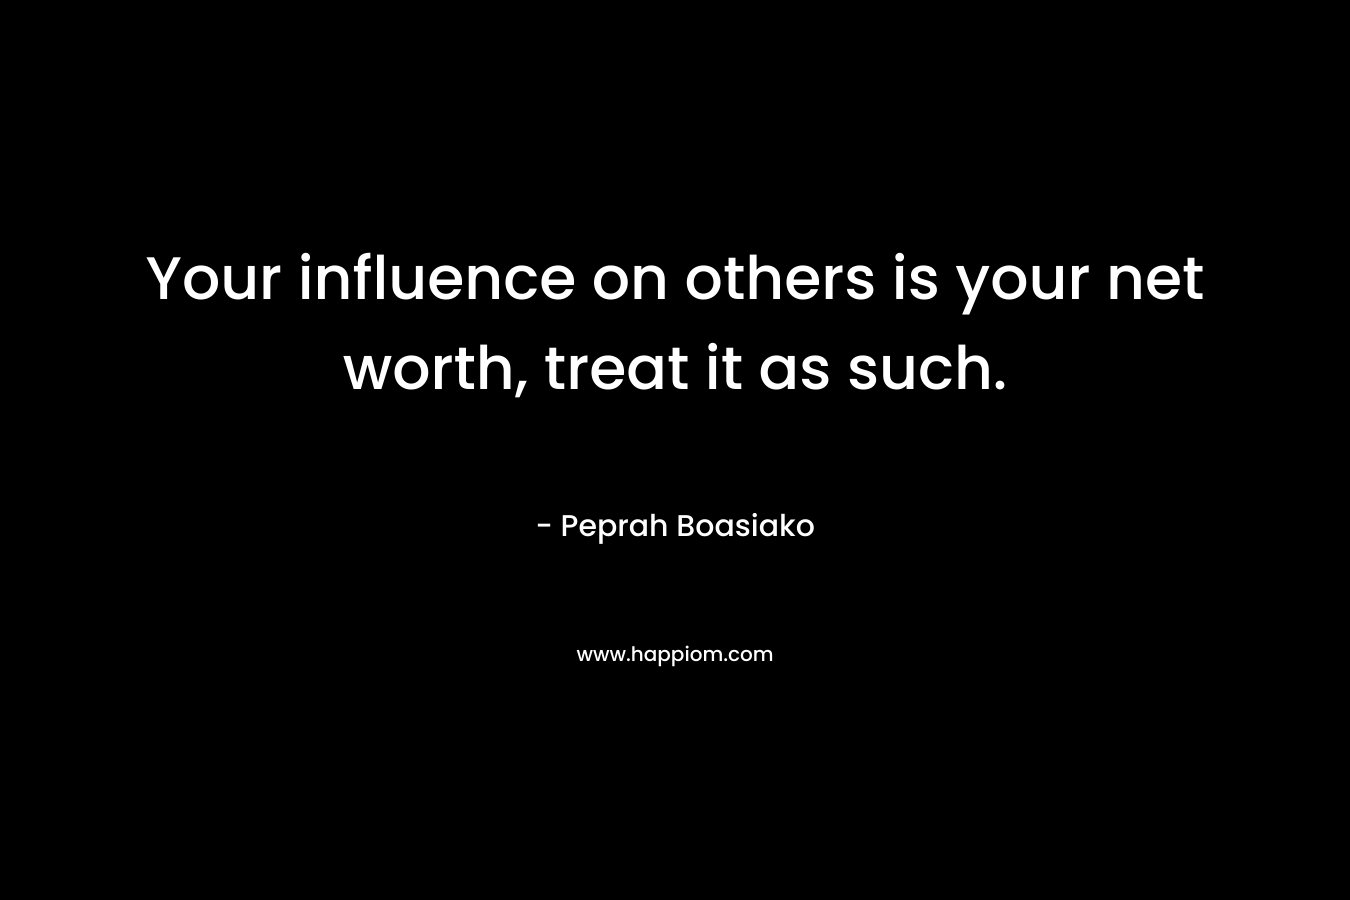 Your influence on others is your net worth, treat it as such.